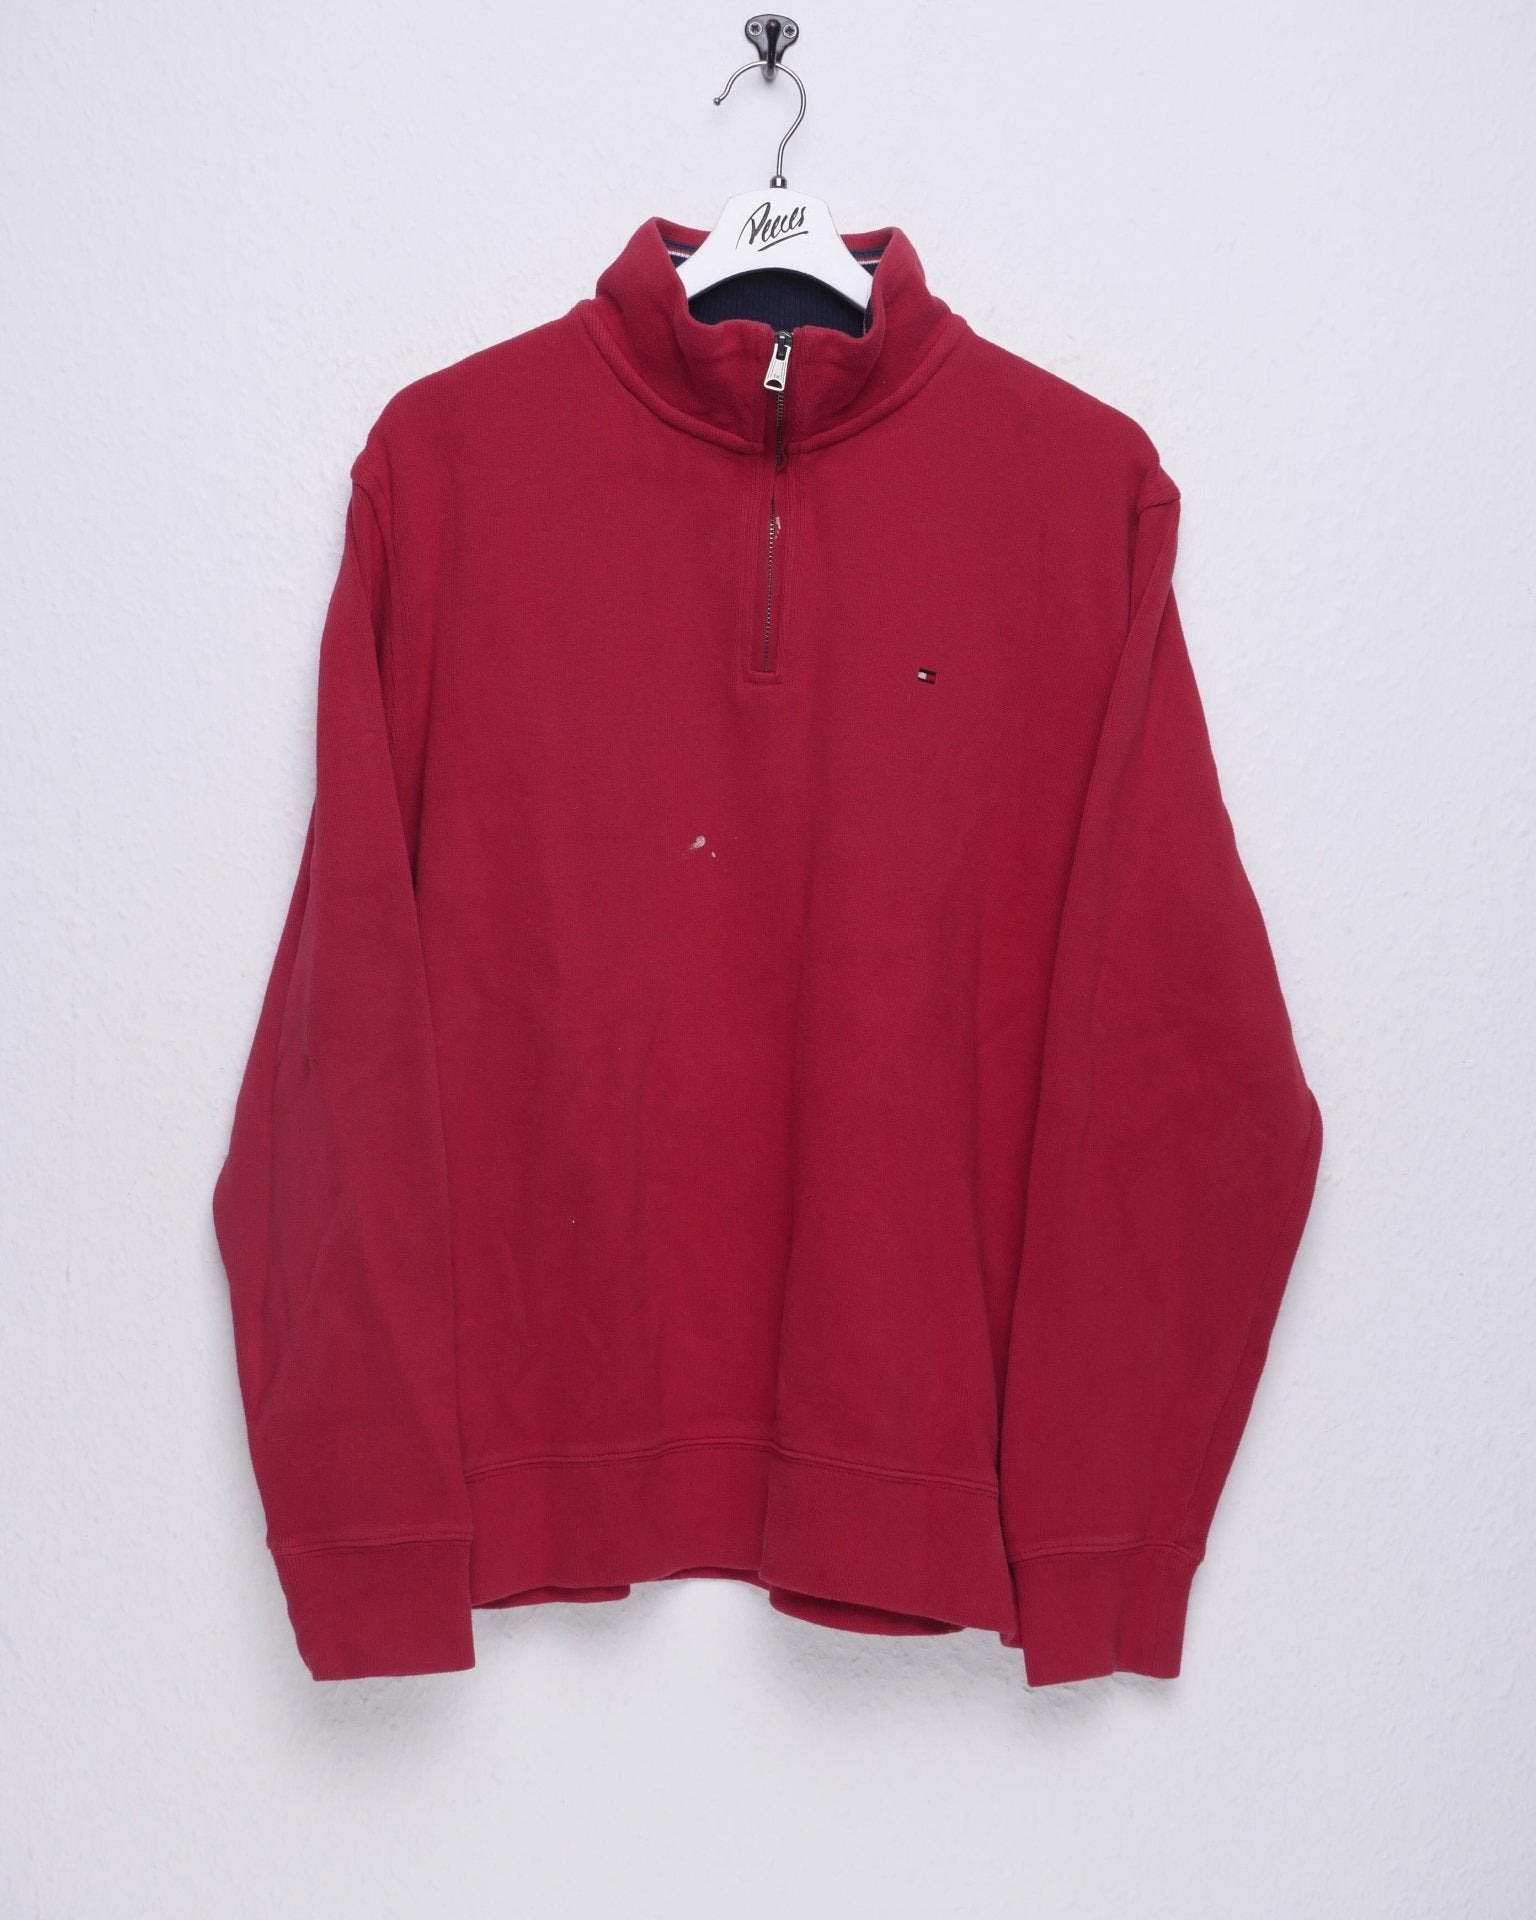 Tommy Hilfiger embroidered Logo red Half Zip Sweater - Peeces